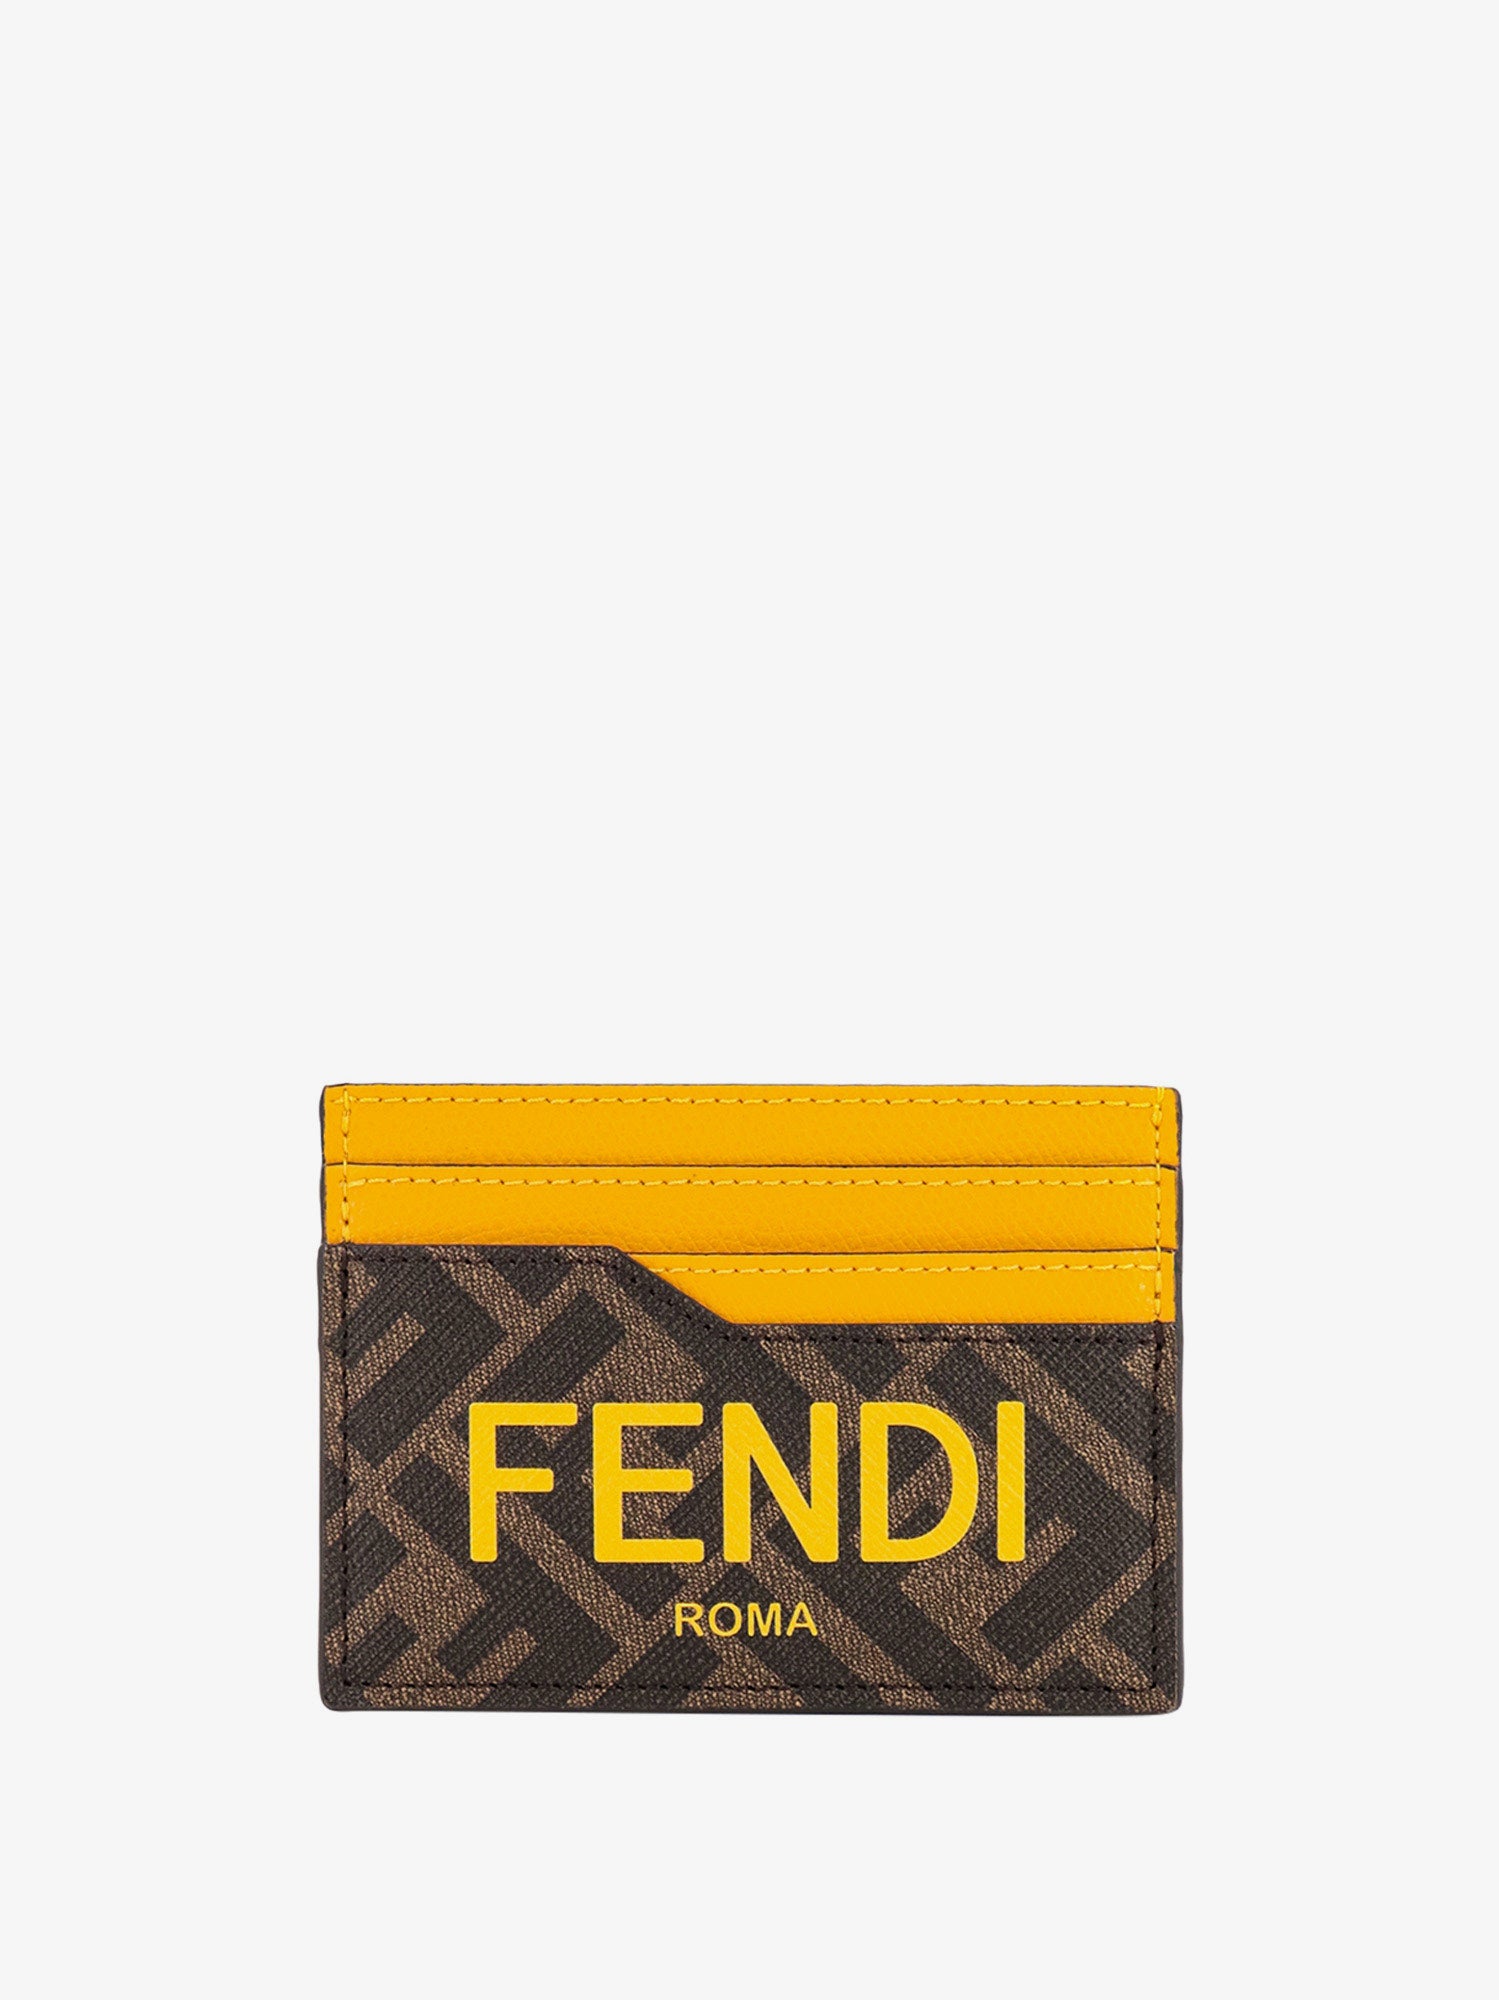 FENDI Card/Key Ring Pouch Card Case Wallet New F/S from Japan